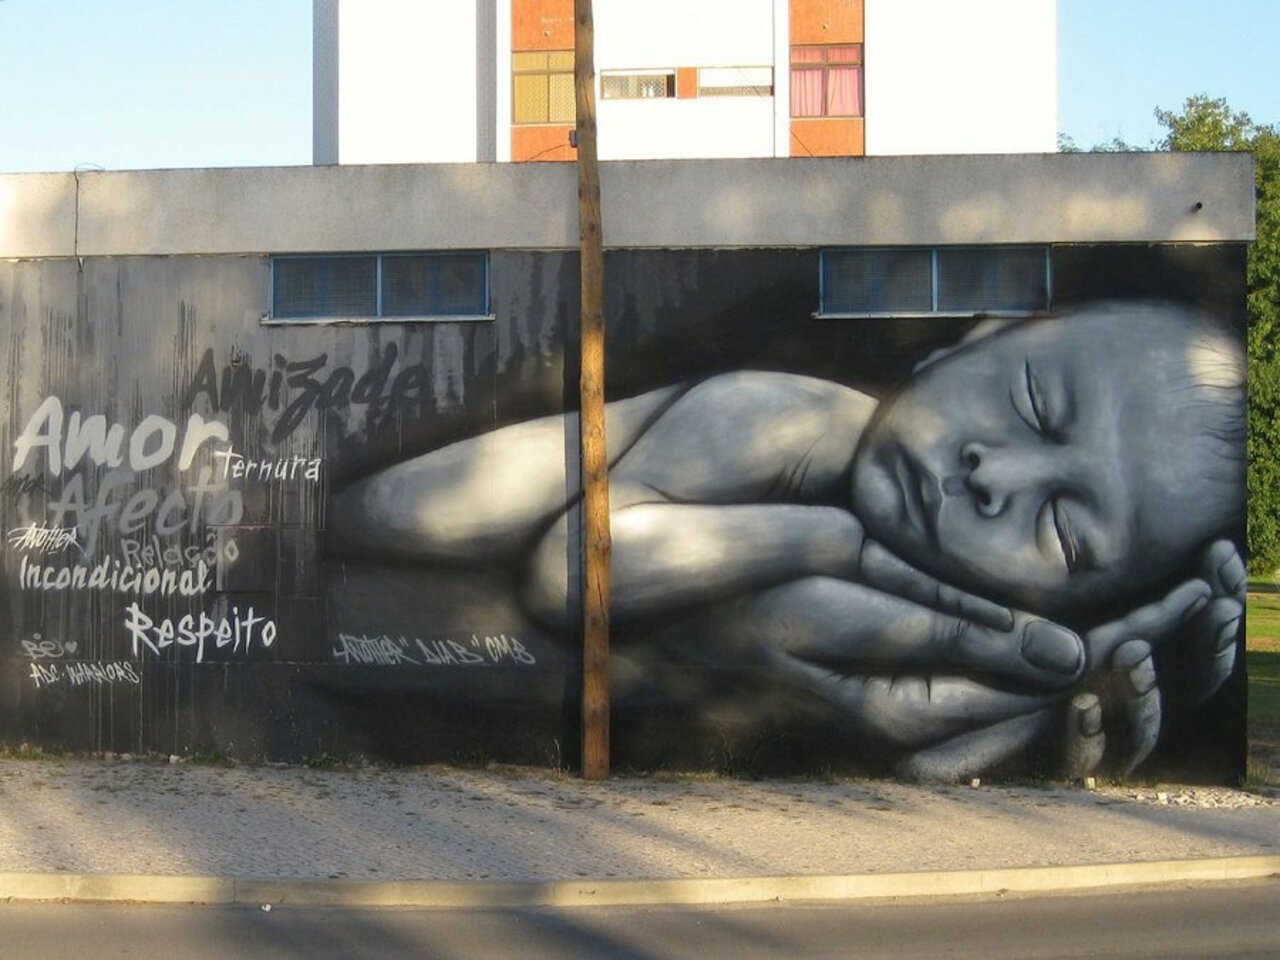 This mural is a beautiful testament to the unconditional love of a parent for their child ❤️ -- Piece by Rod Santos aka #Another (http://globalstreetart.com/another). -- #globalstreetart #streetart #art #graffiti https://t.co/A11TCbg9SG